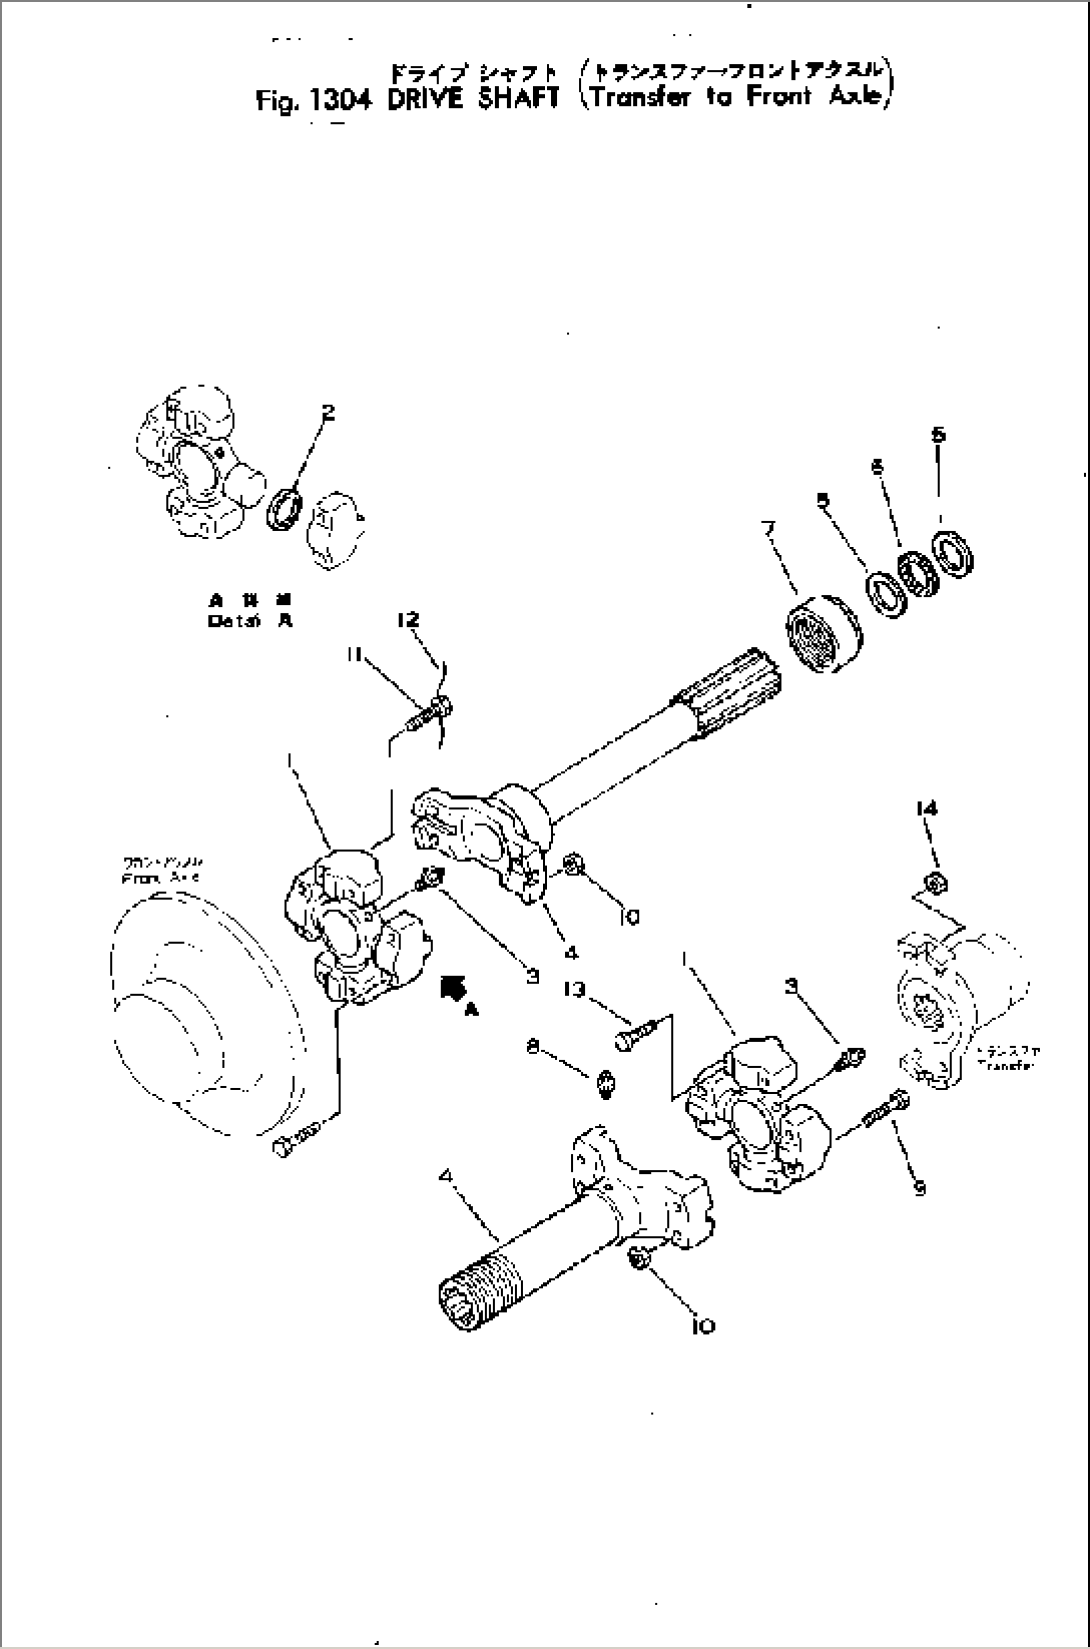 DRIVE SHAFT (TRANSFER TO FRONT AXLE)